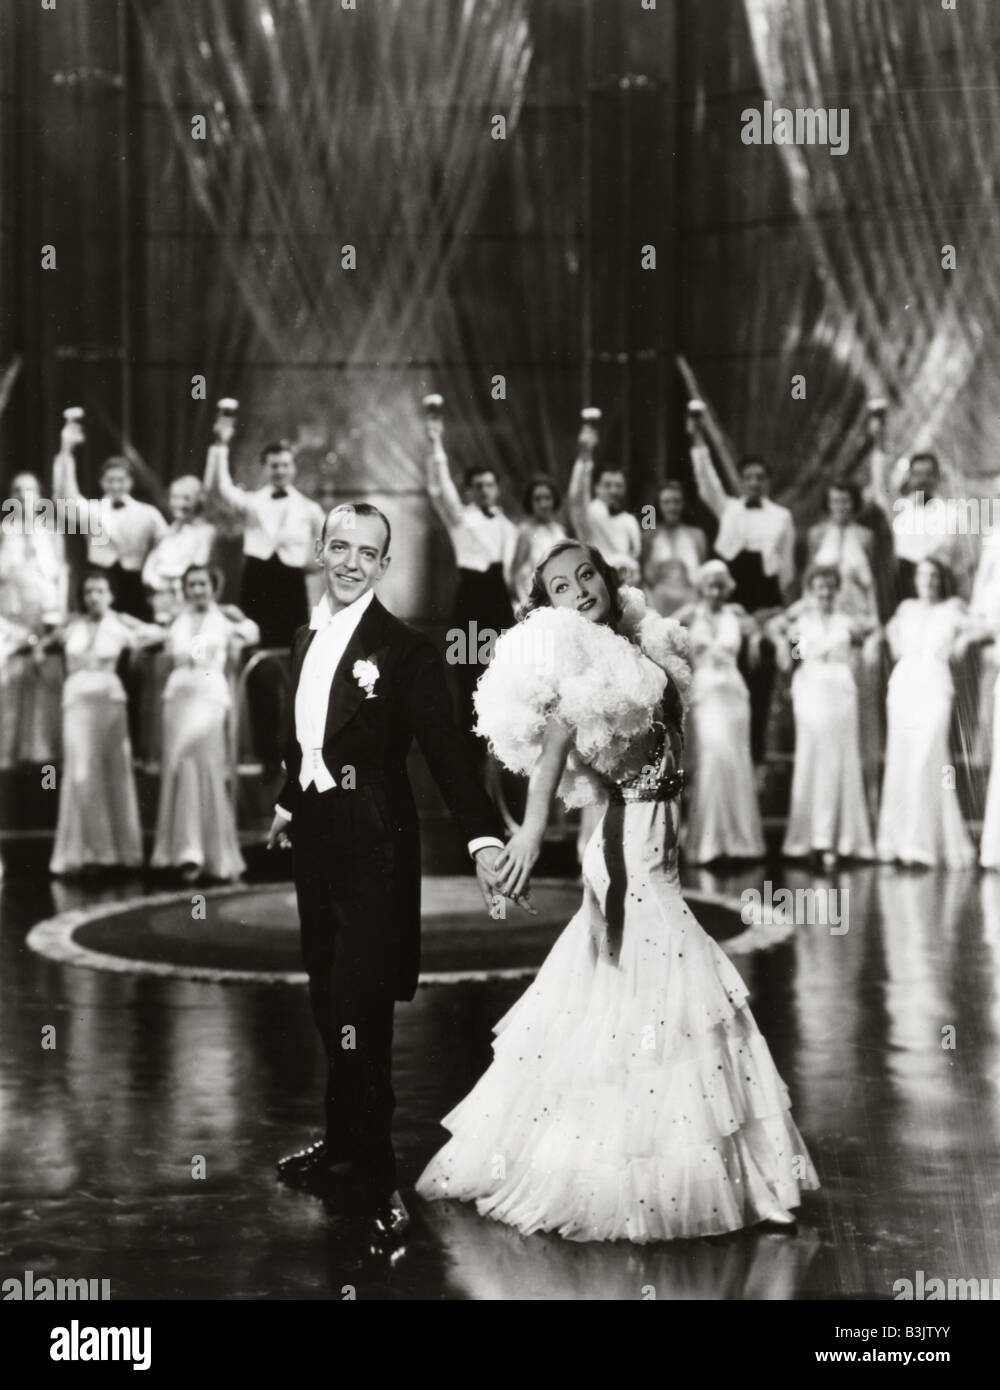 DANCING LADY 1933 MGM Film mit Joan Crawford und Fred Astaire Stockfoto